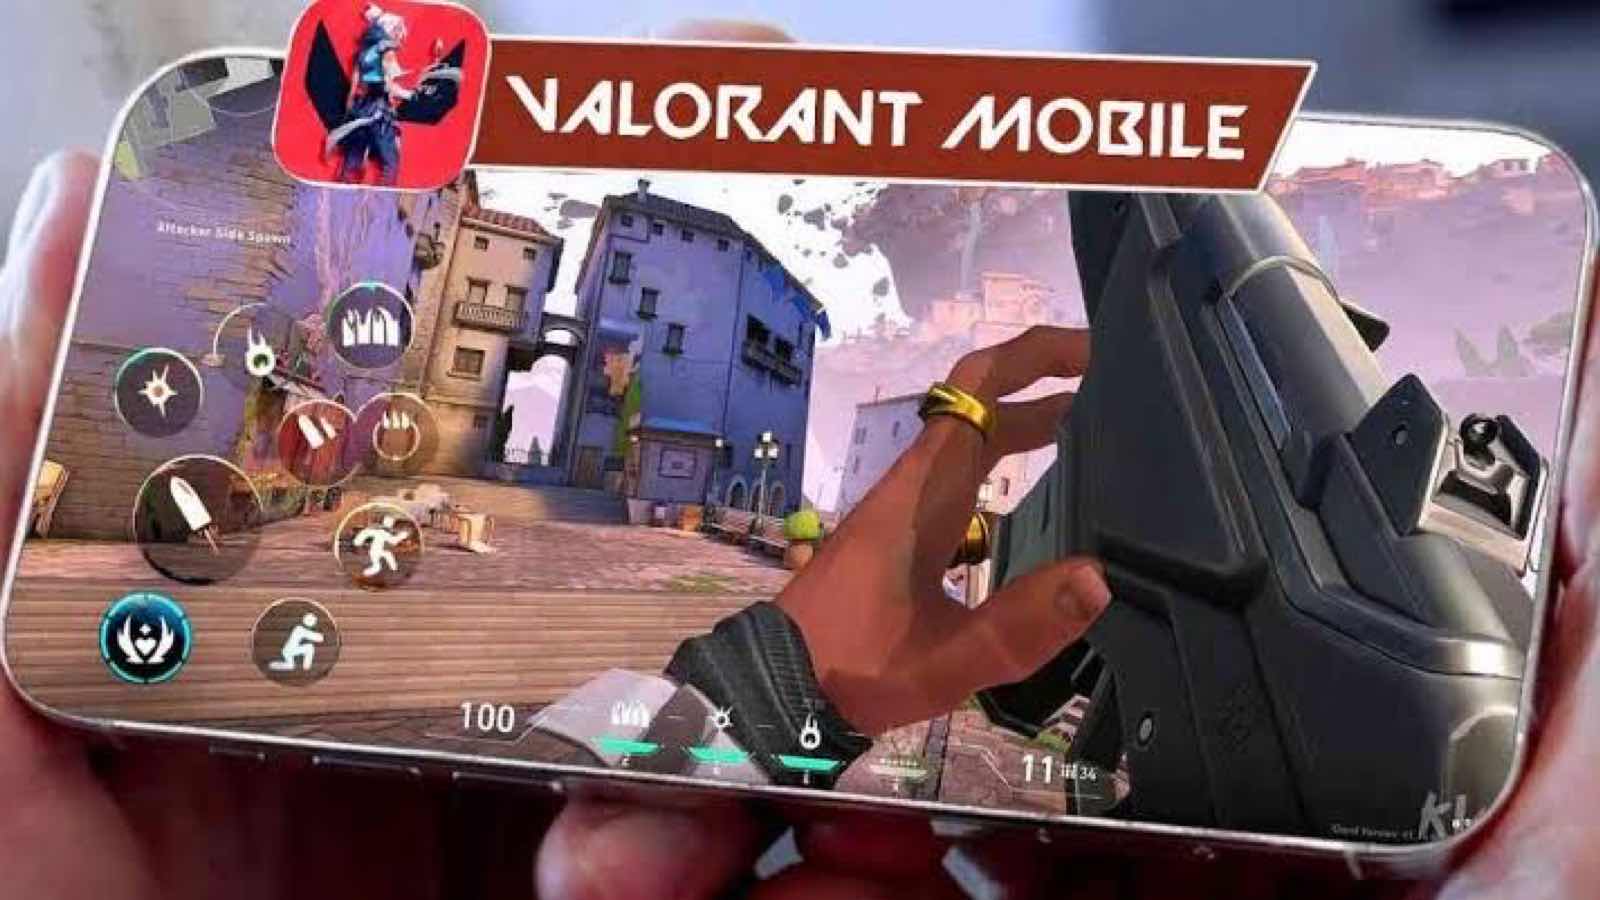 Tencent Plans to Launch Valorant Mobile and Organize Esports League in China